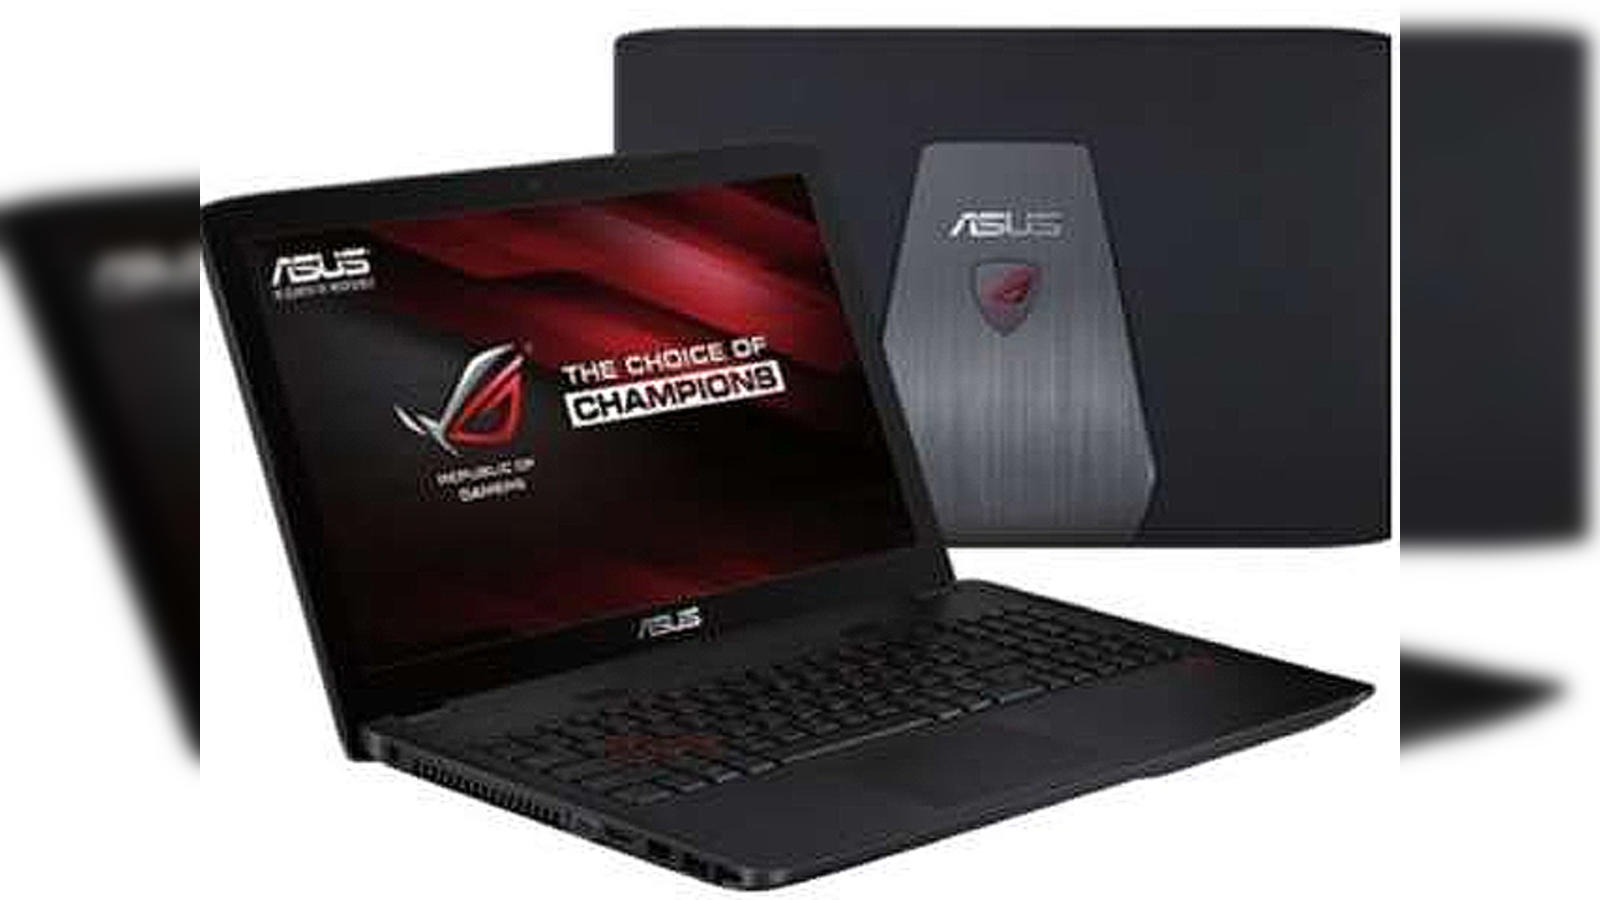 Asus ROG GL552JX review: Top-end specifications with value-for